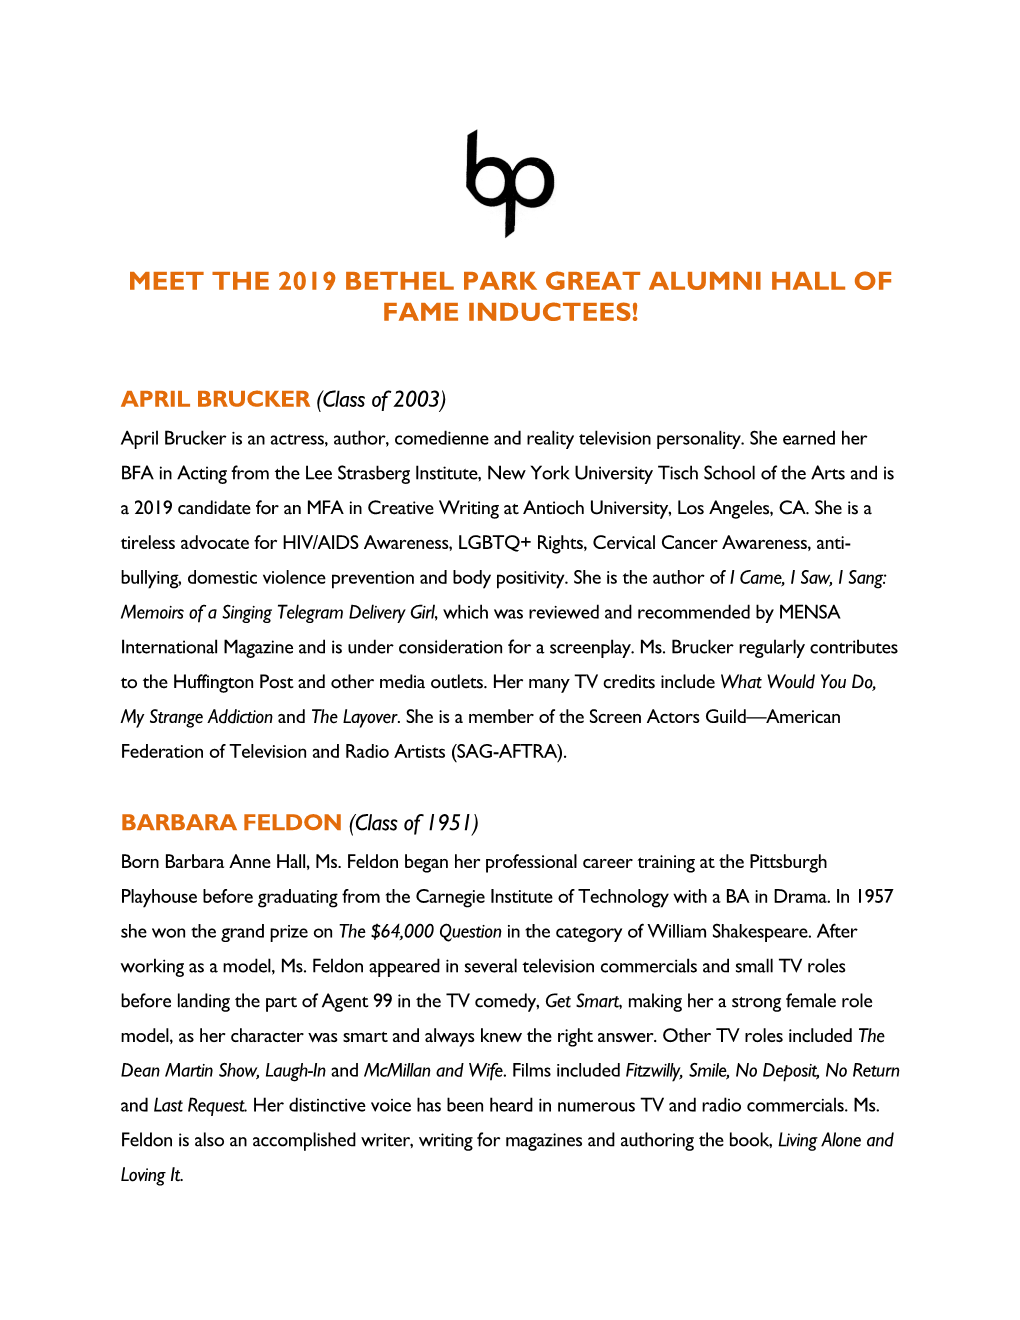 Meet the 2019 Bethel Park Great Alumni Hall of Fame Inductees!